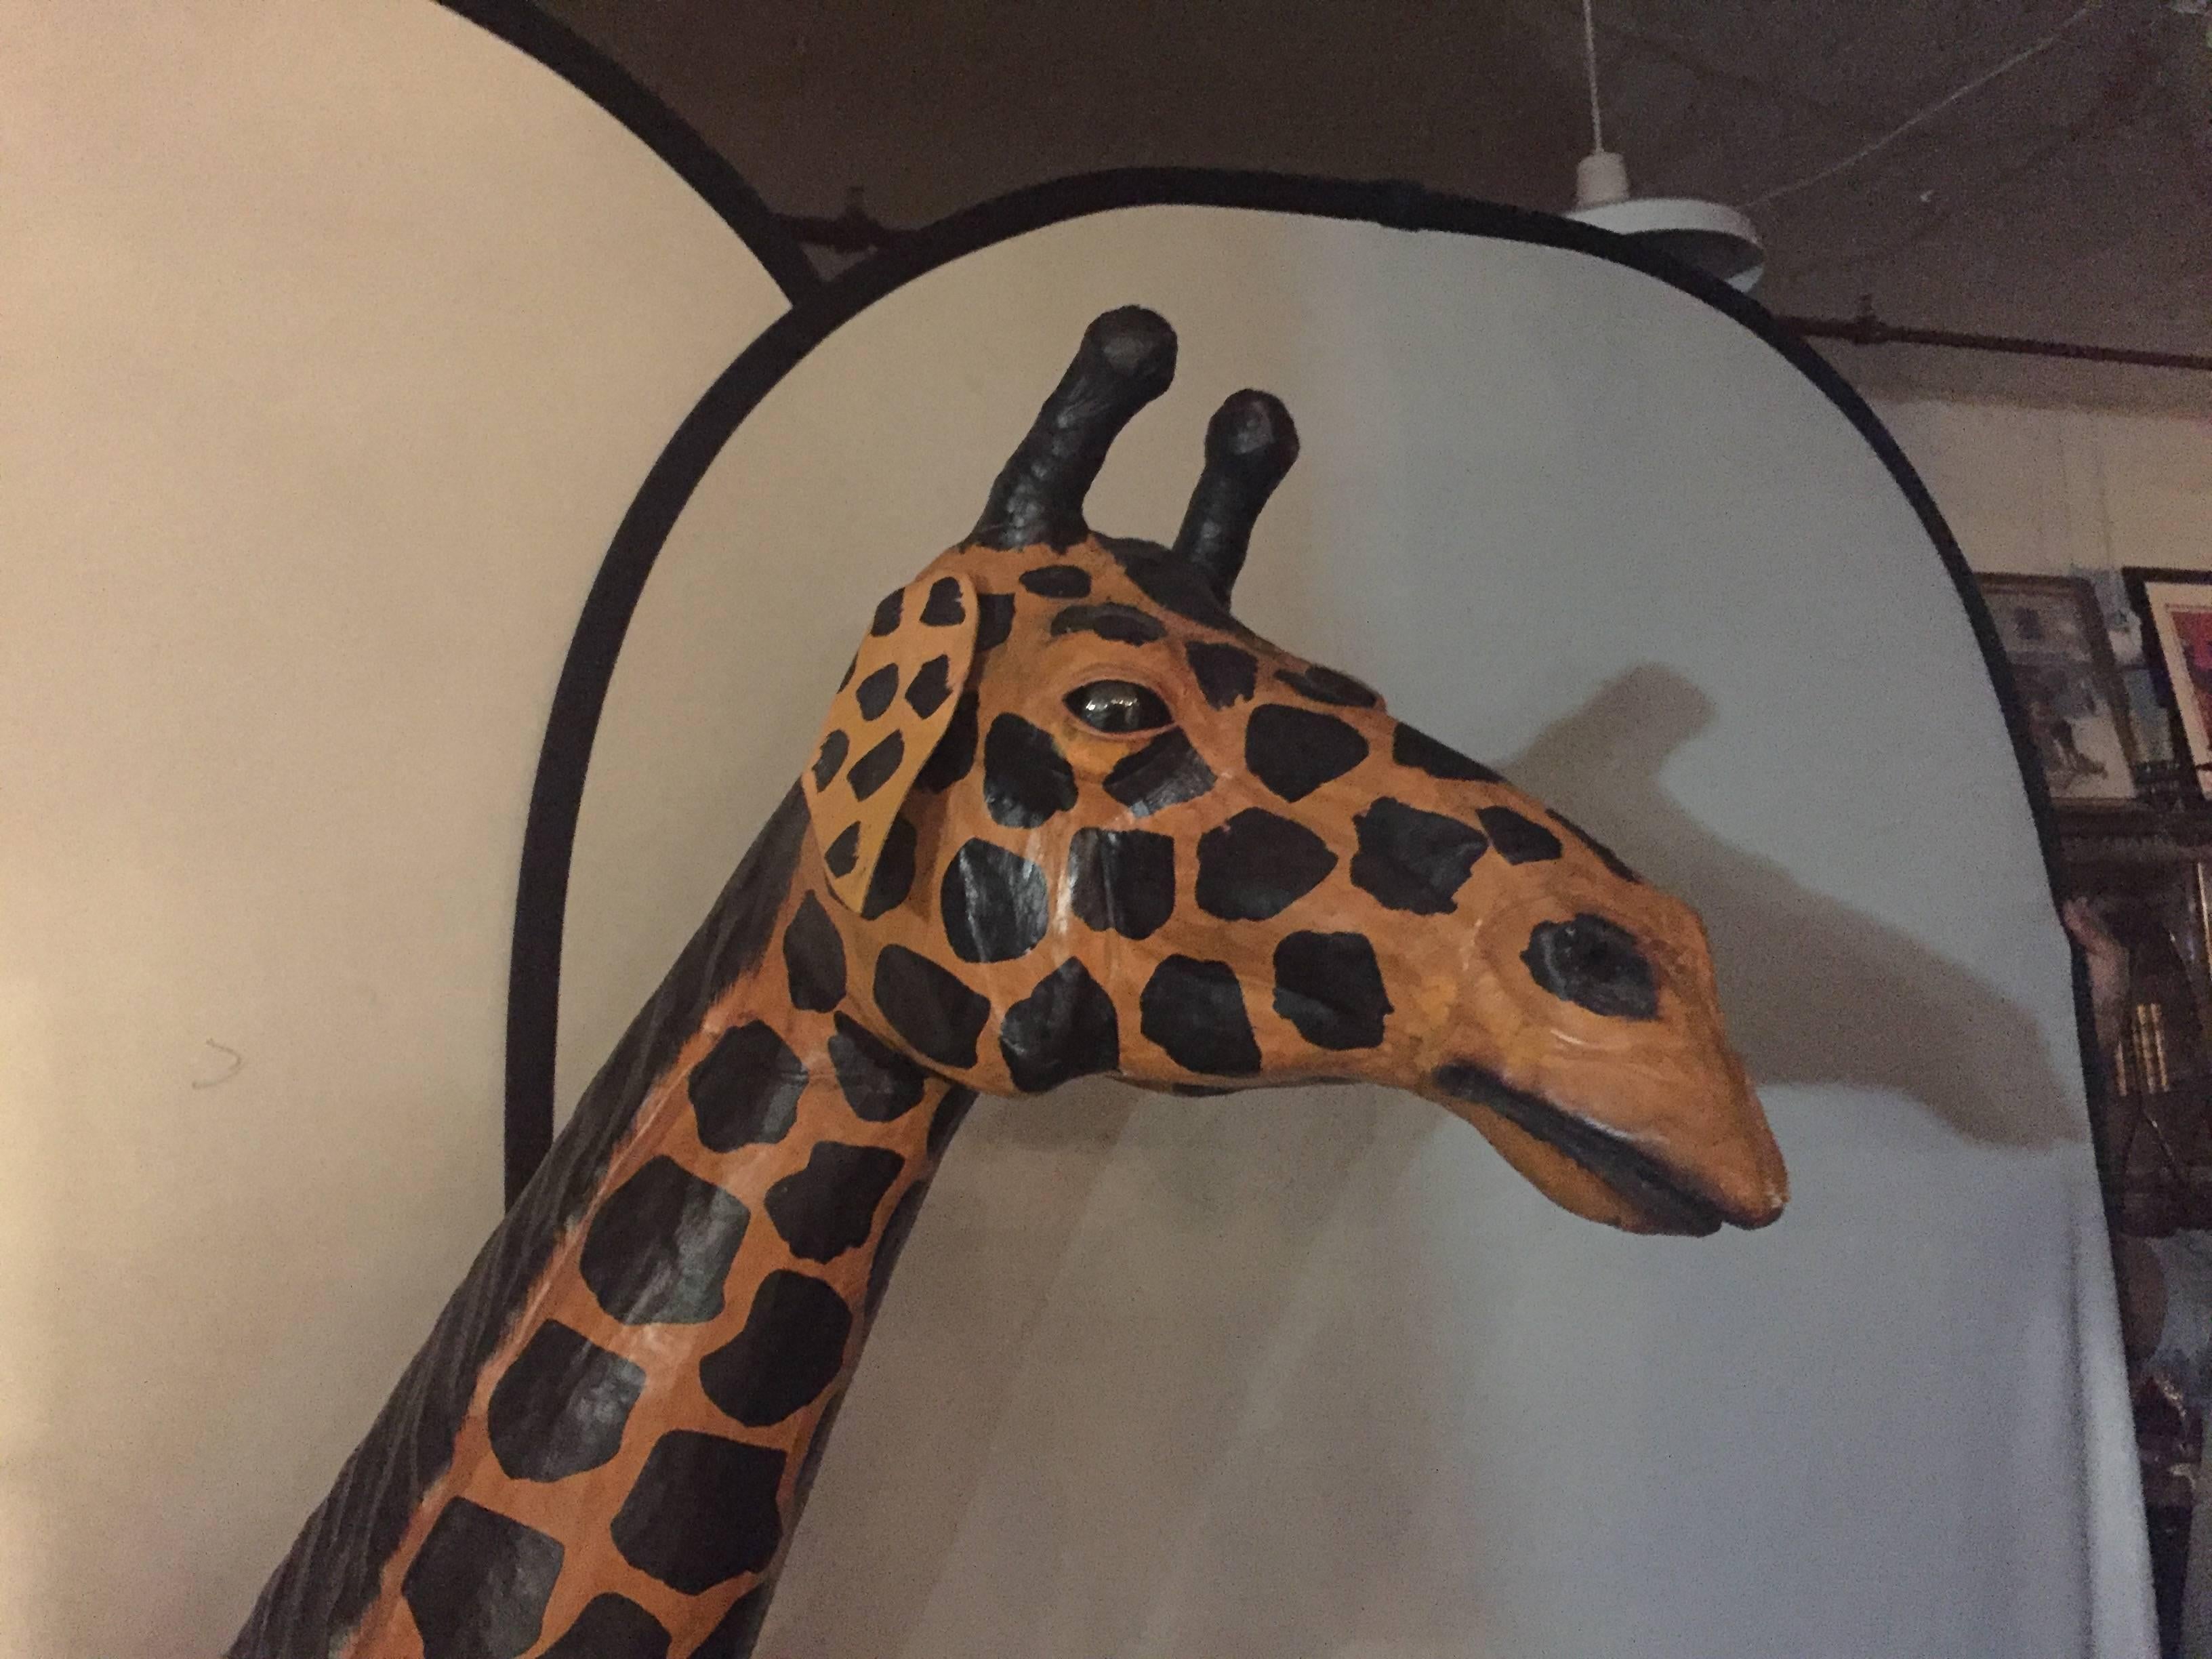 Other Pair of Life-Size Giraffes Each Made of Painted Leather